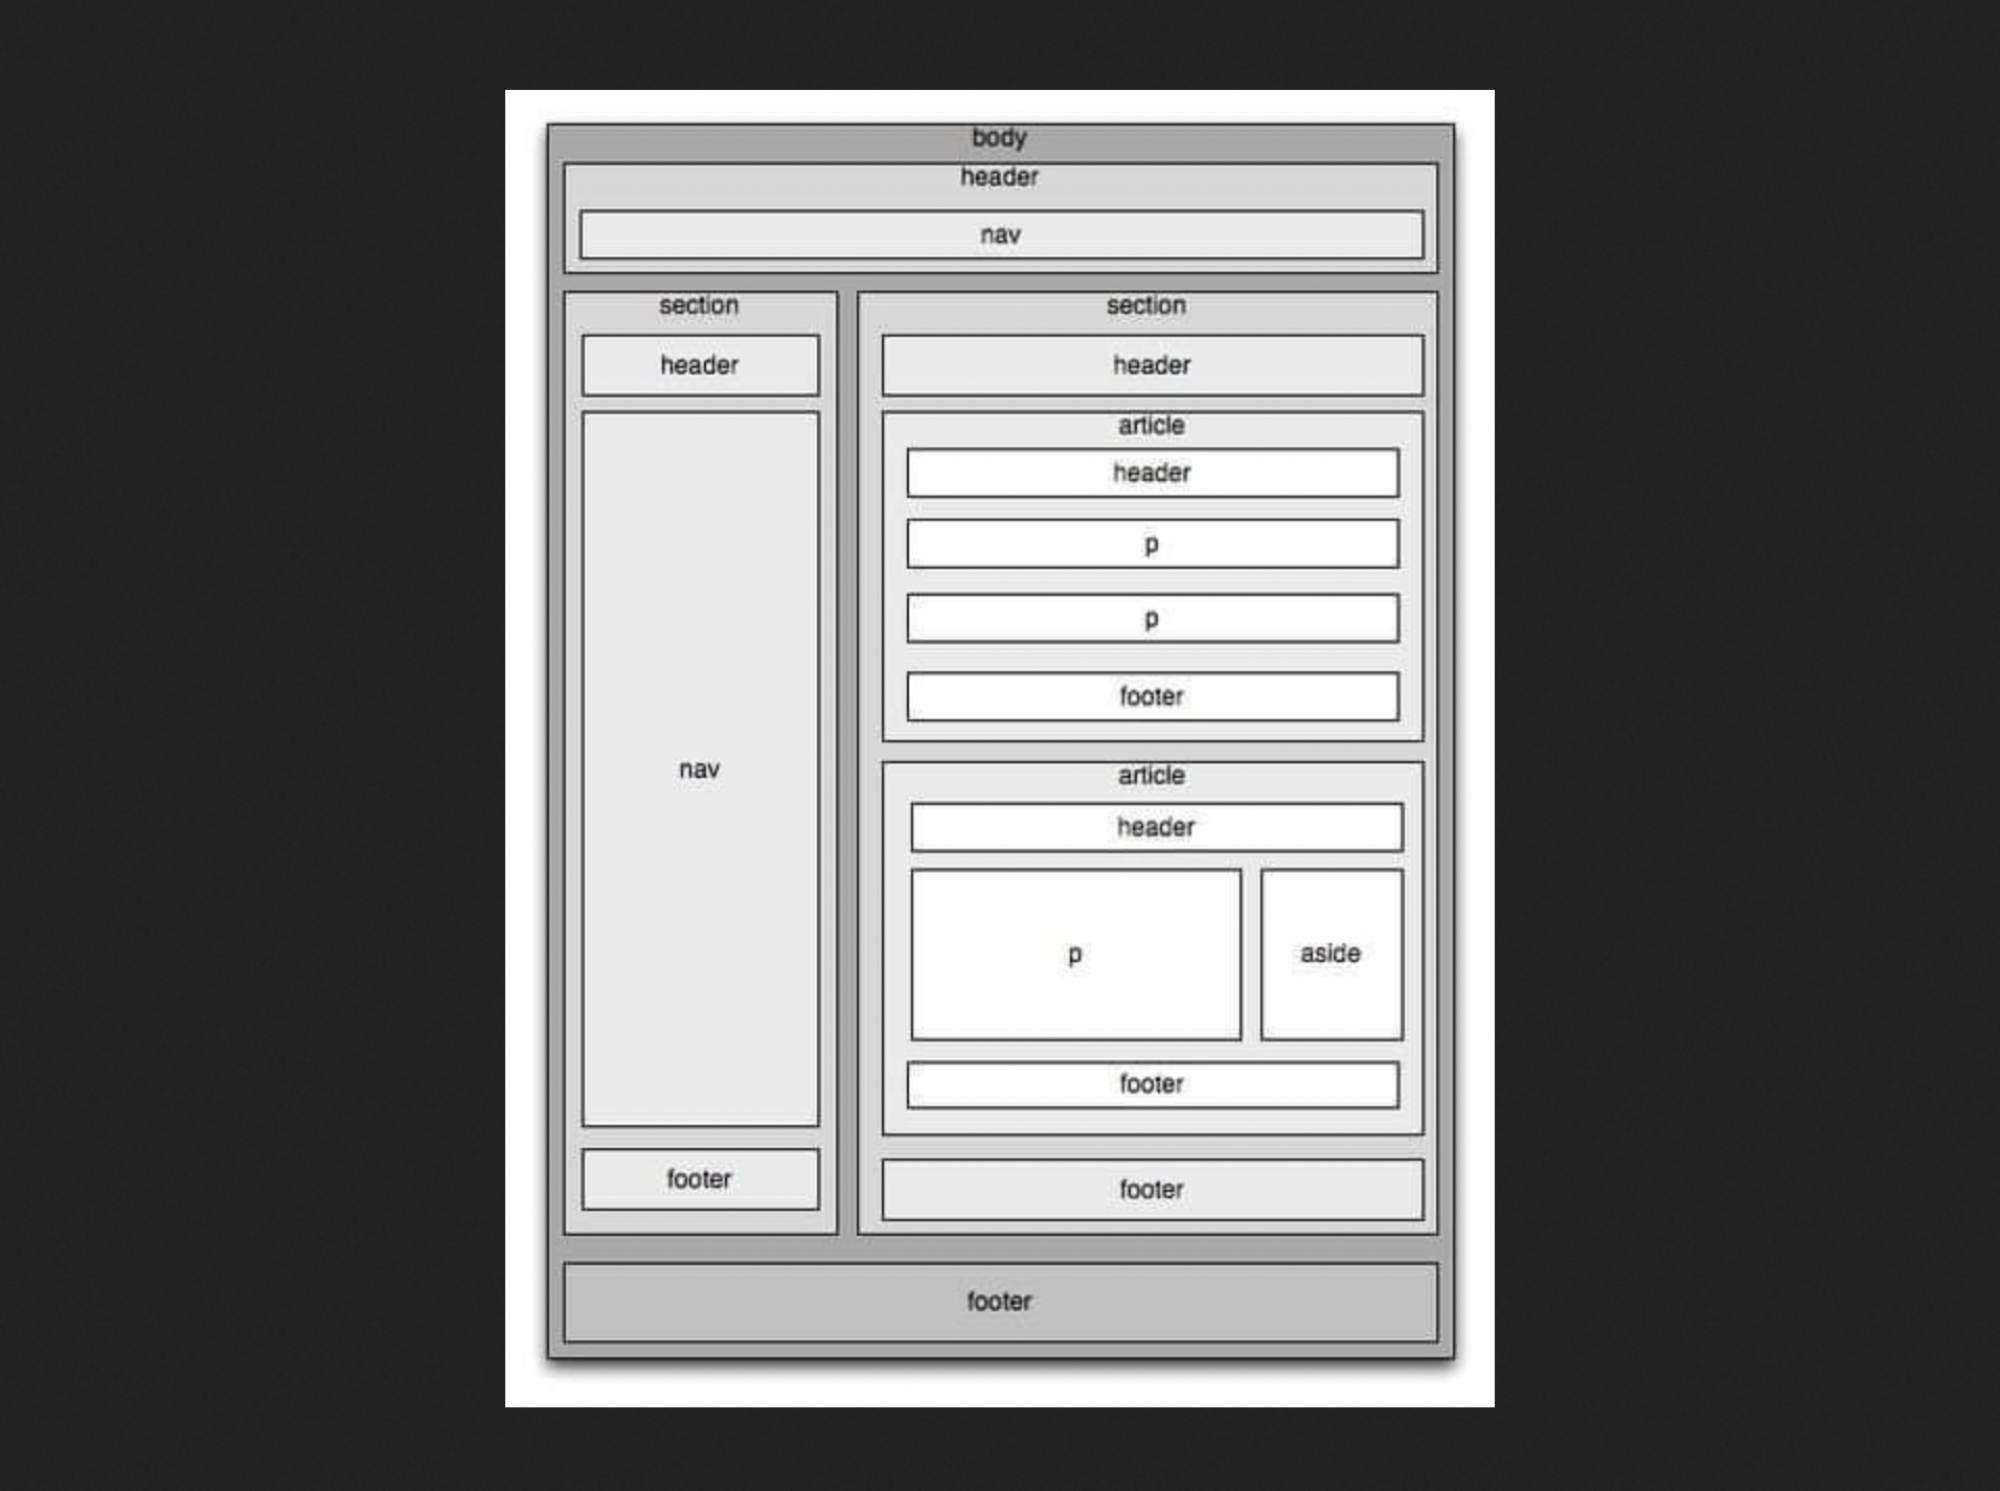 Website wireframe diagram showing HTML header elements as the main site header but also as headers of many individual sections